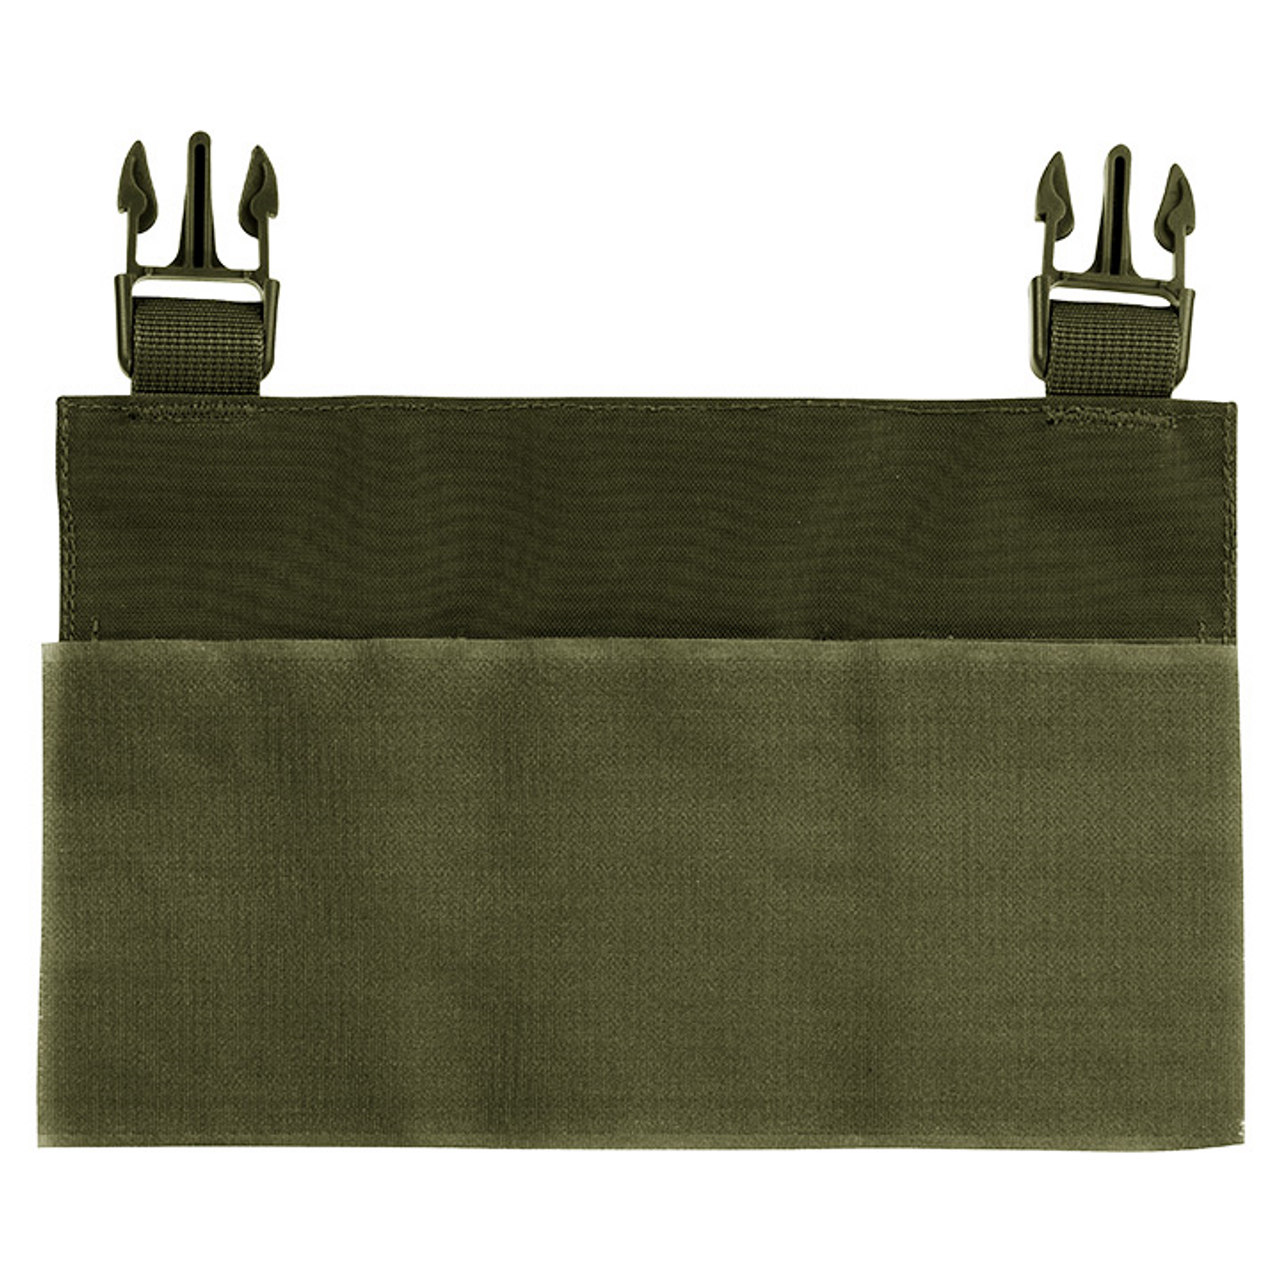 Viper VX Buckle Up Rifle Mag panel - Green